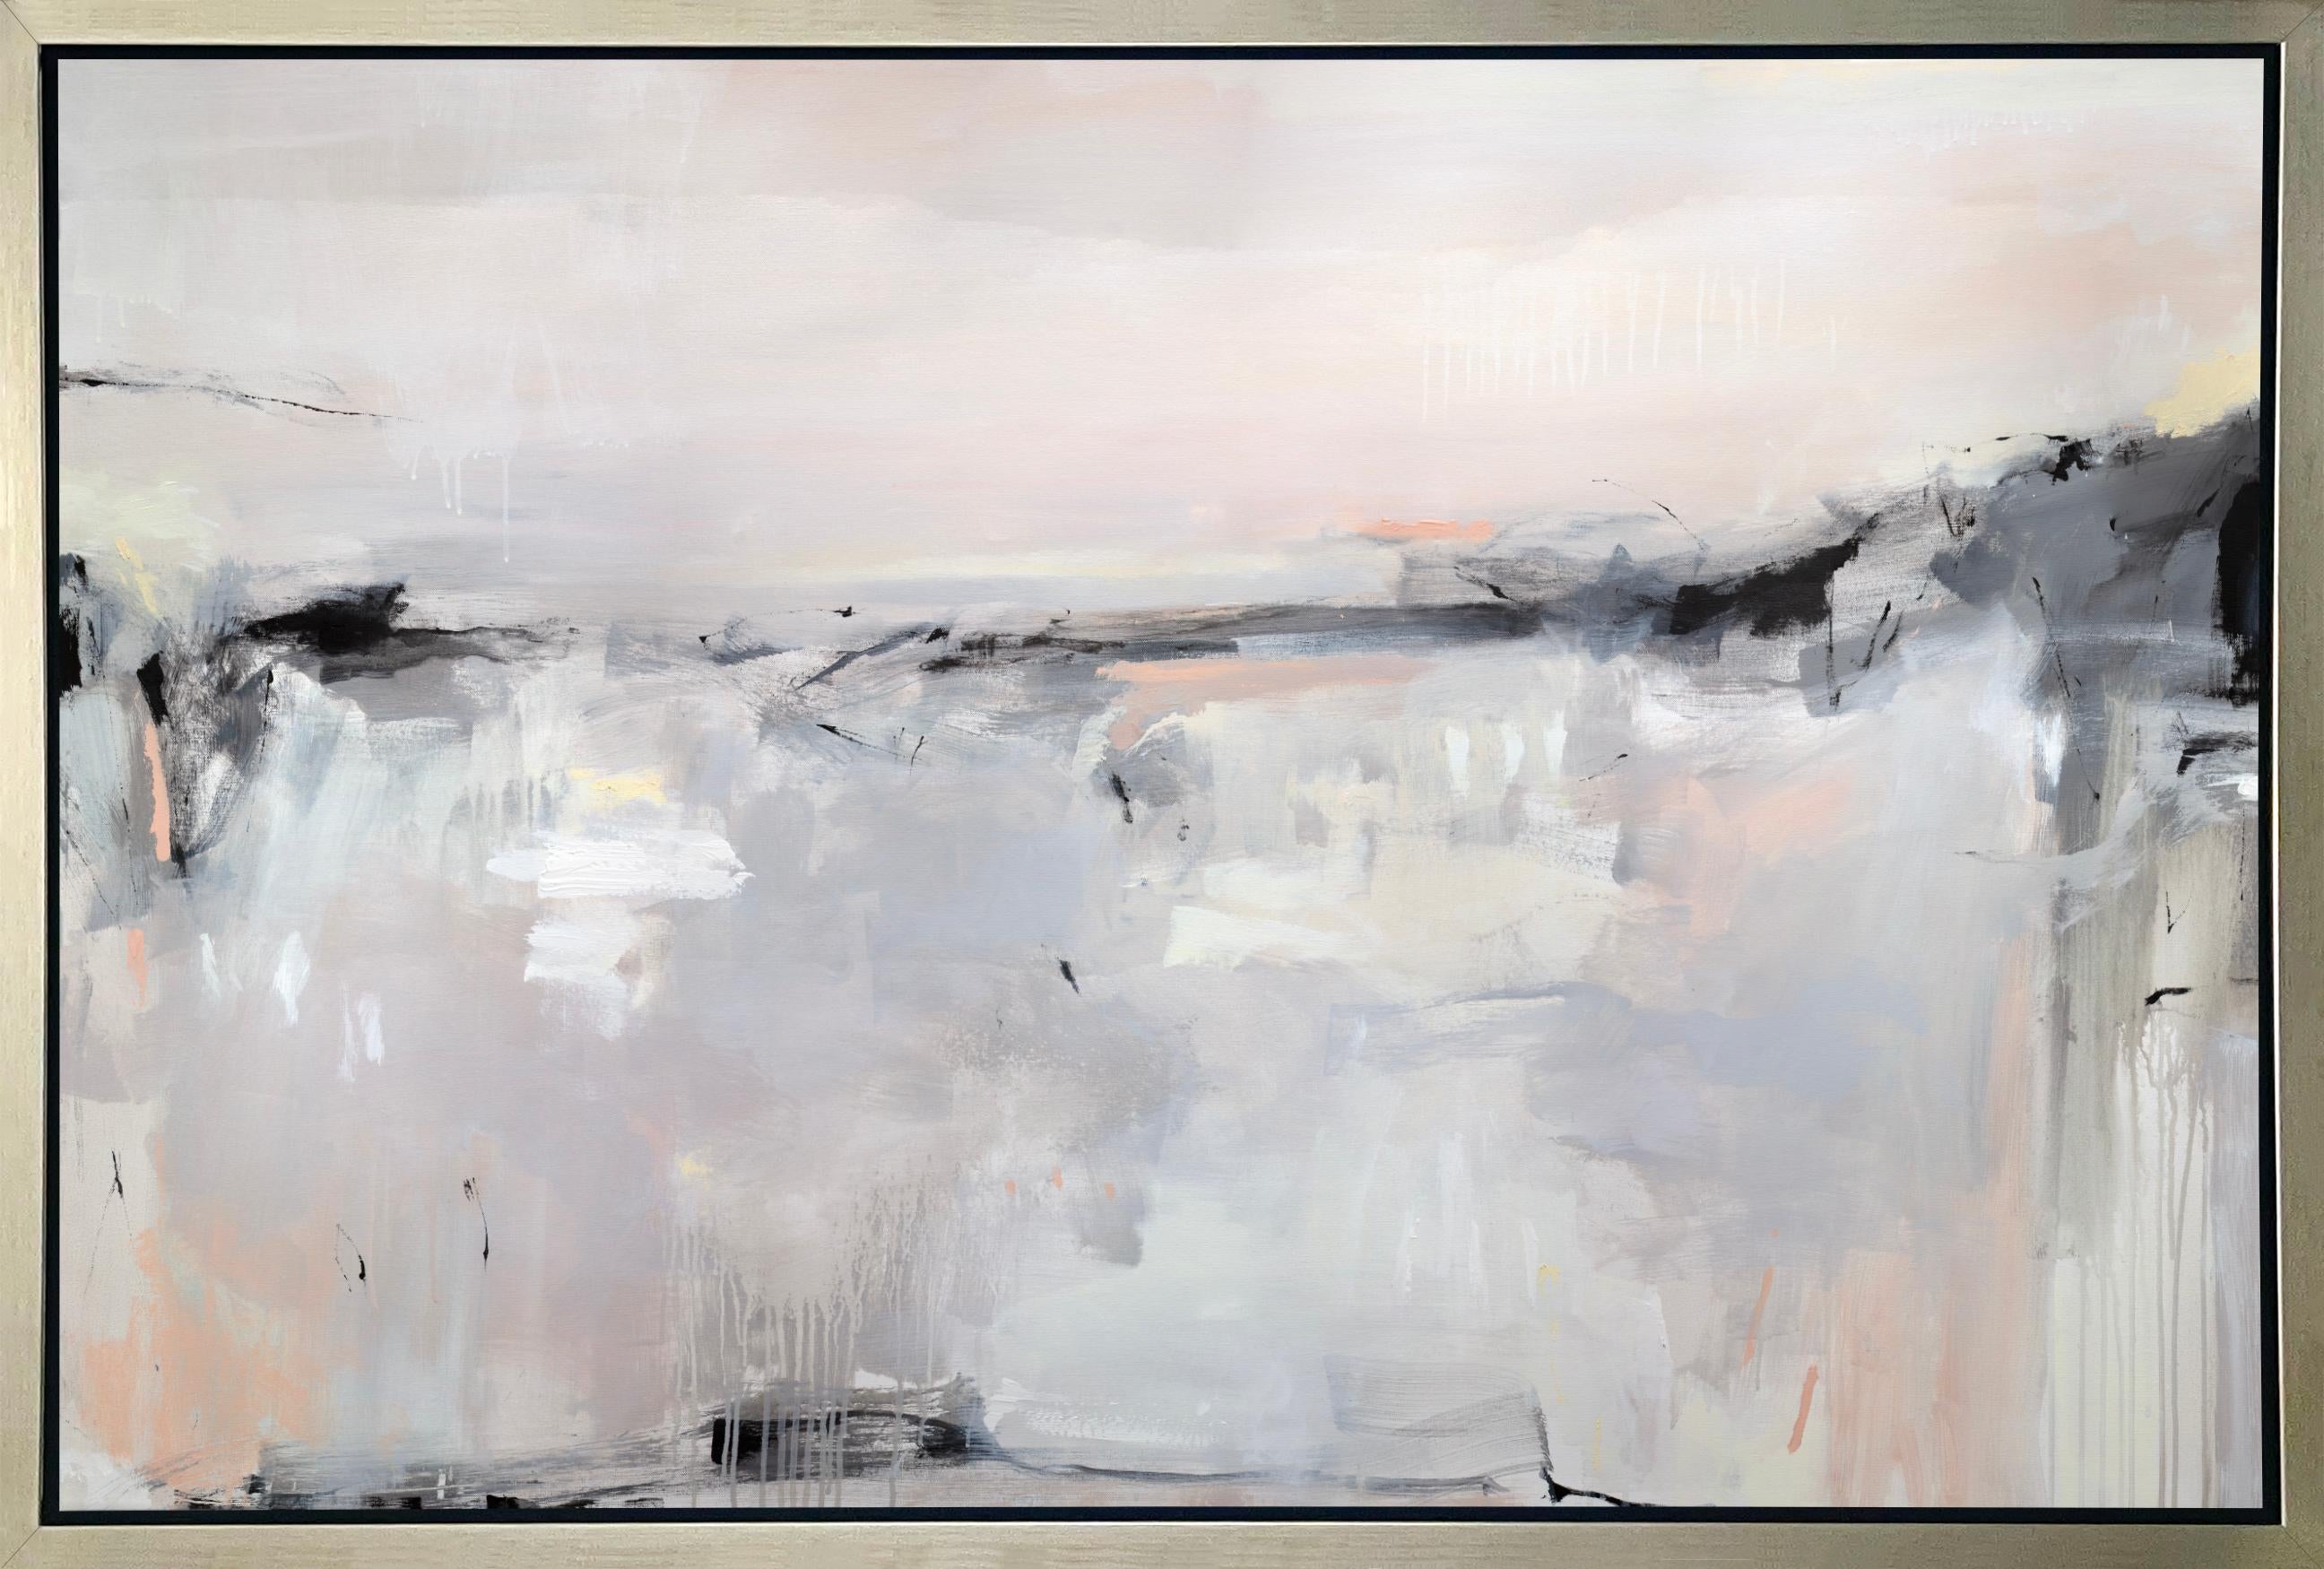 Kelly Rossetti Abstract Print – ""Forever Roaming", gerahmter Giclee-Druck in limitierter Auflage, 40"" x 60""